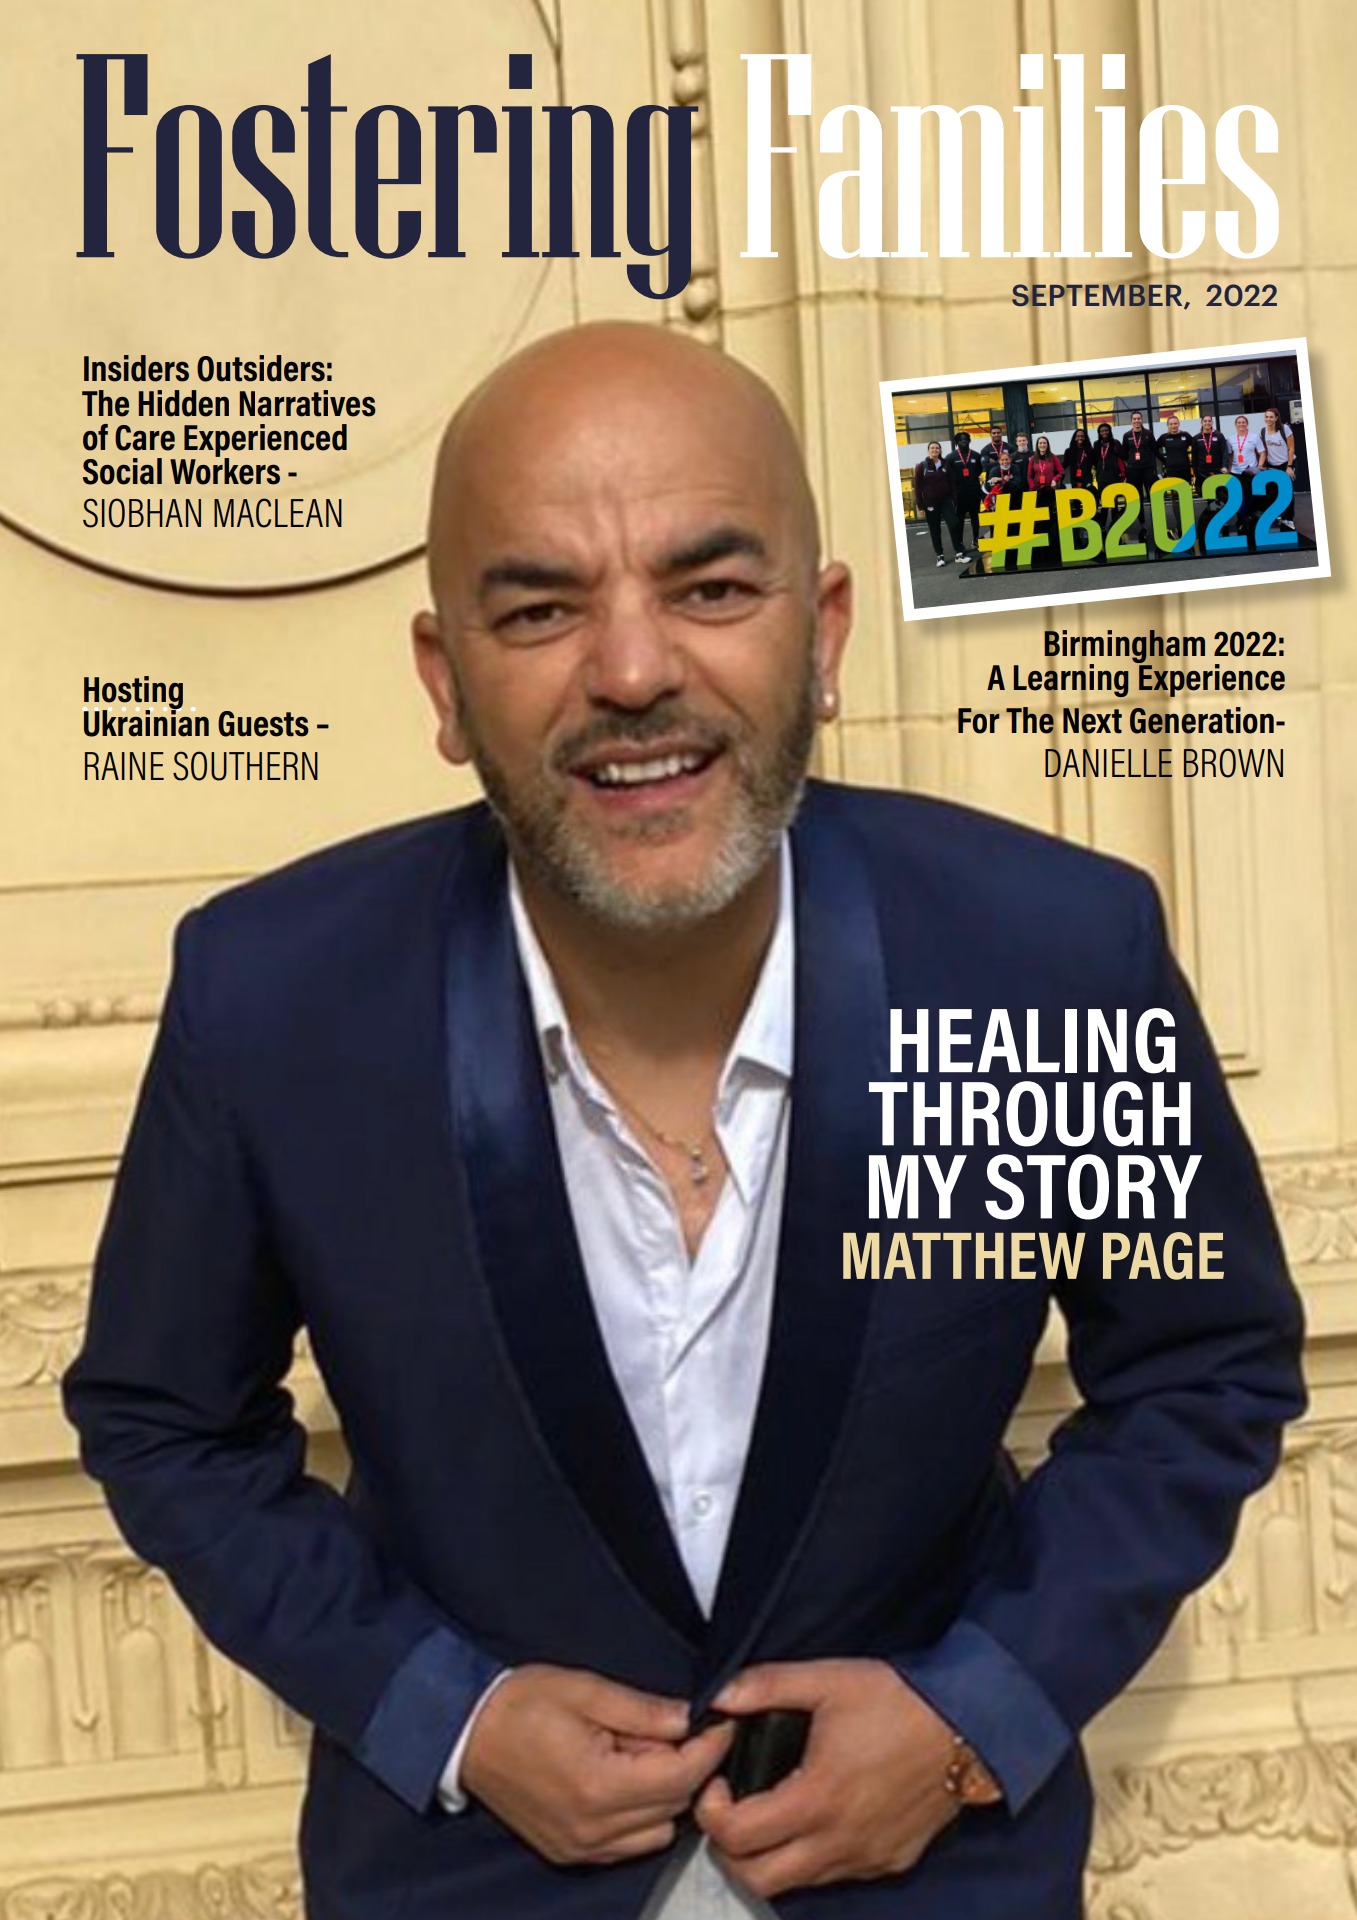 Fostering Families Magazine September 2022